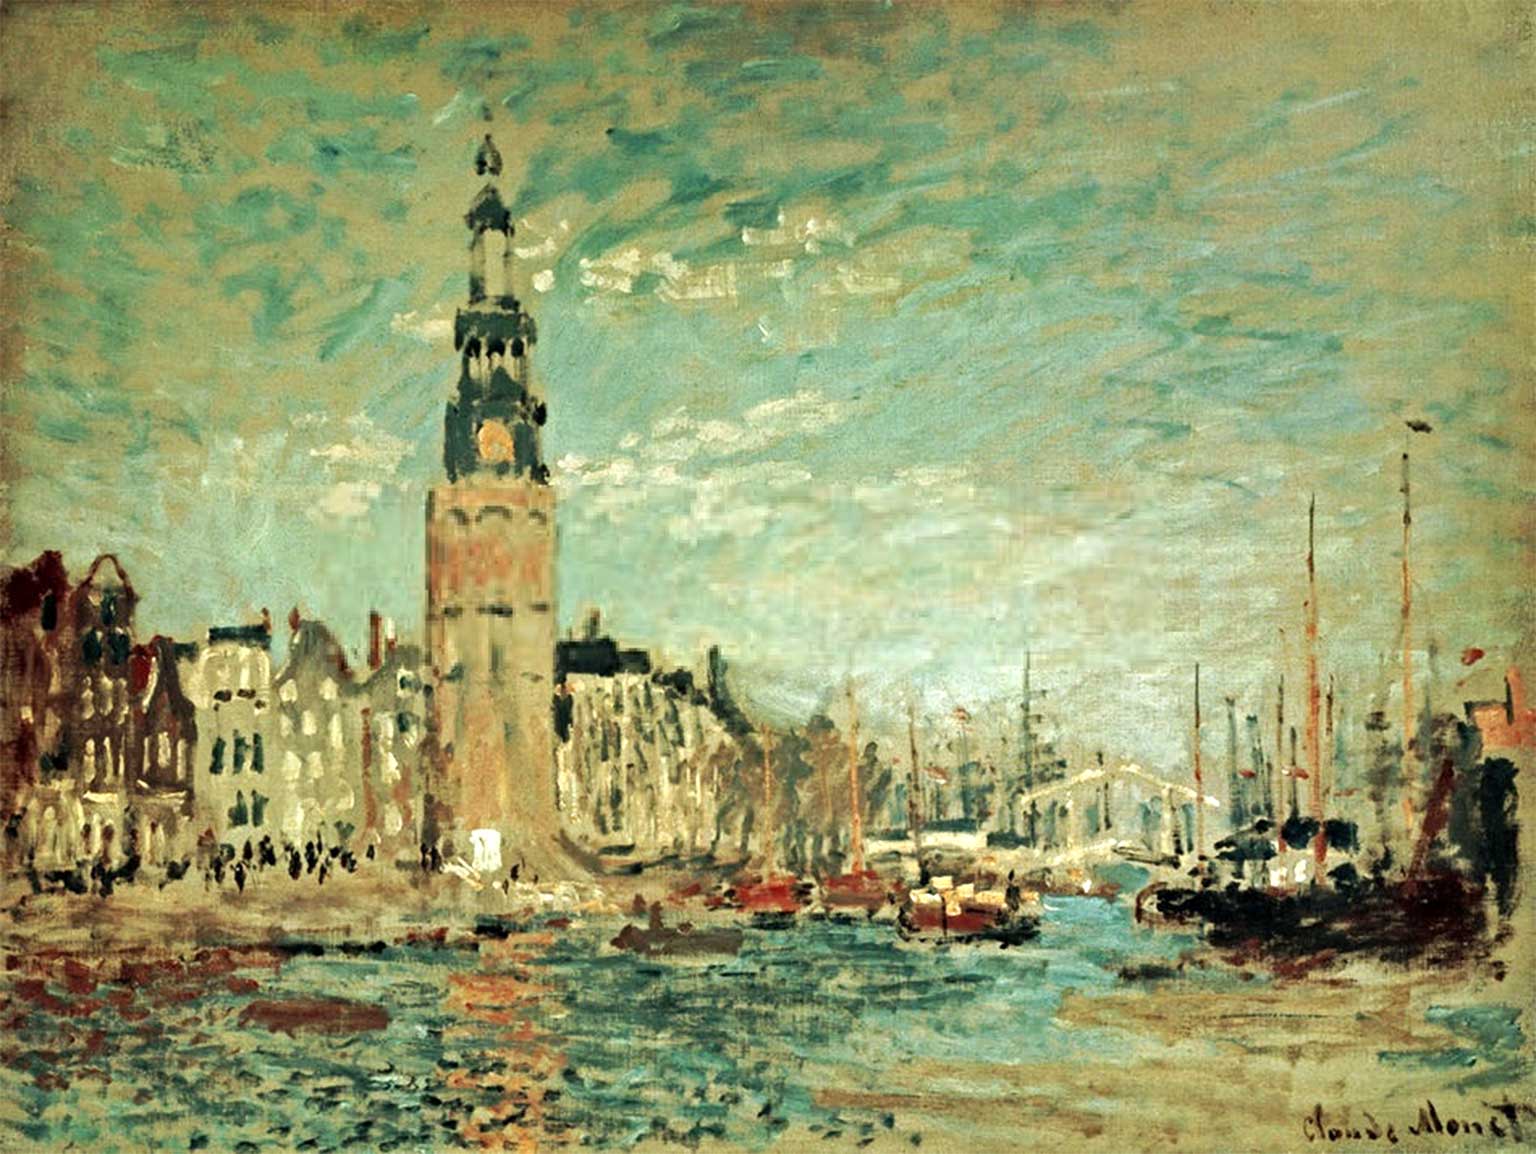 Montelbaans Tower, Amsterdam, painting by Claude Monet from 1874